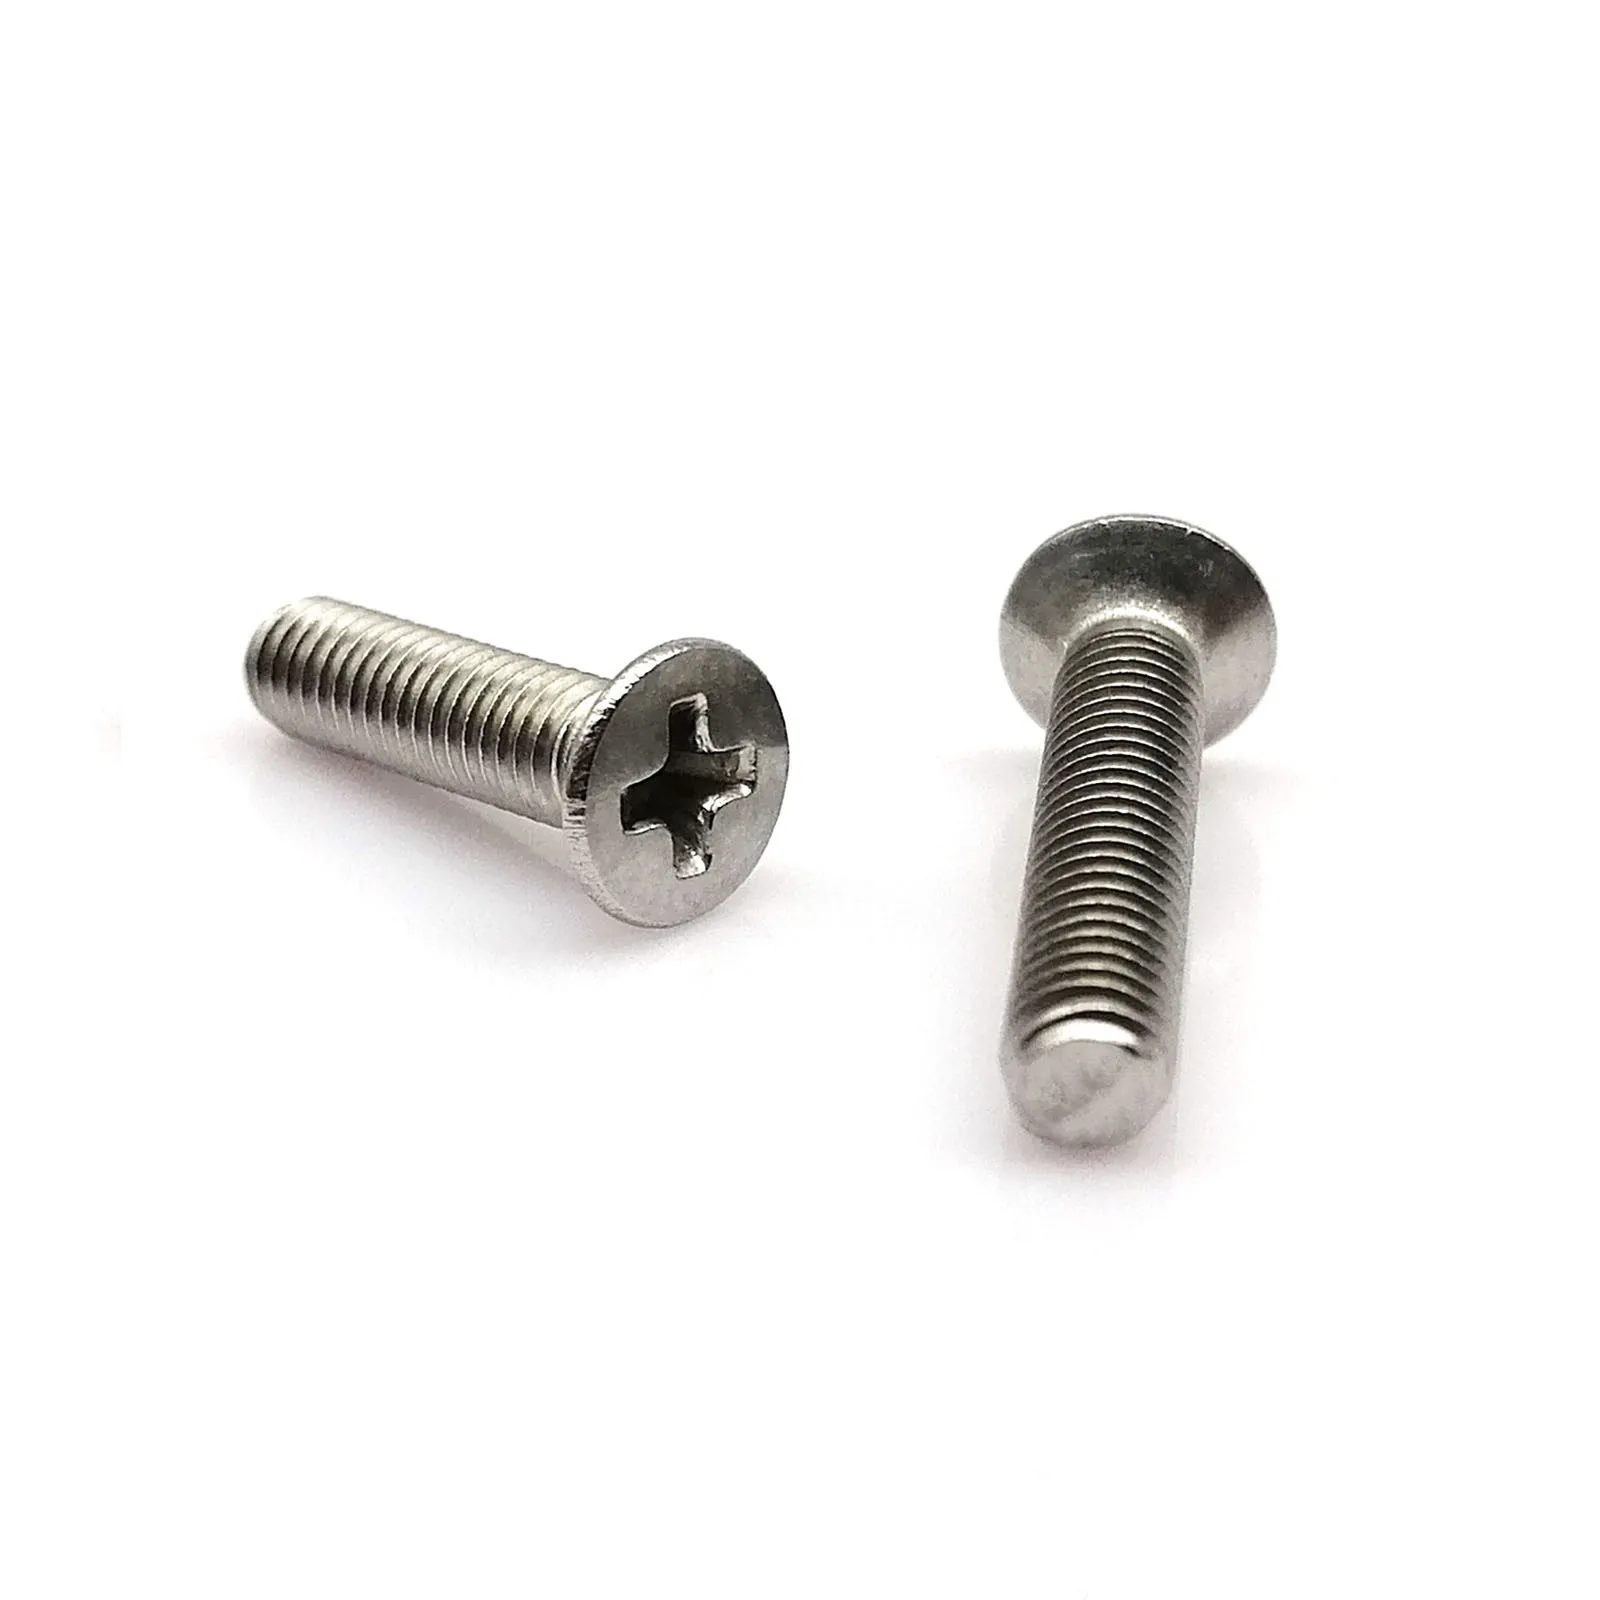 Stainless steel flat head tiny machine screws for electronics